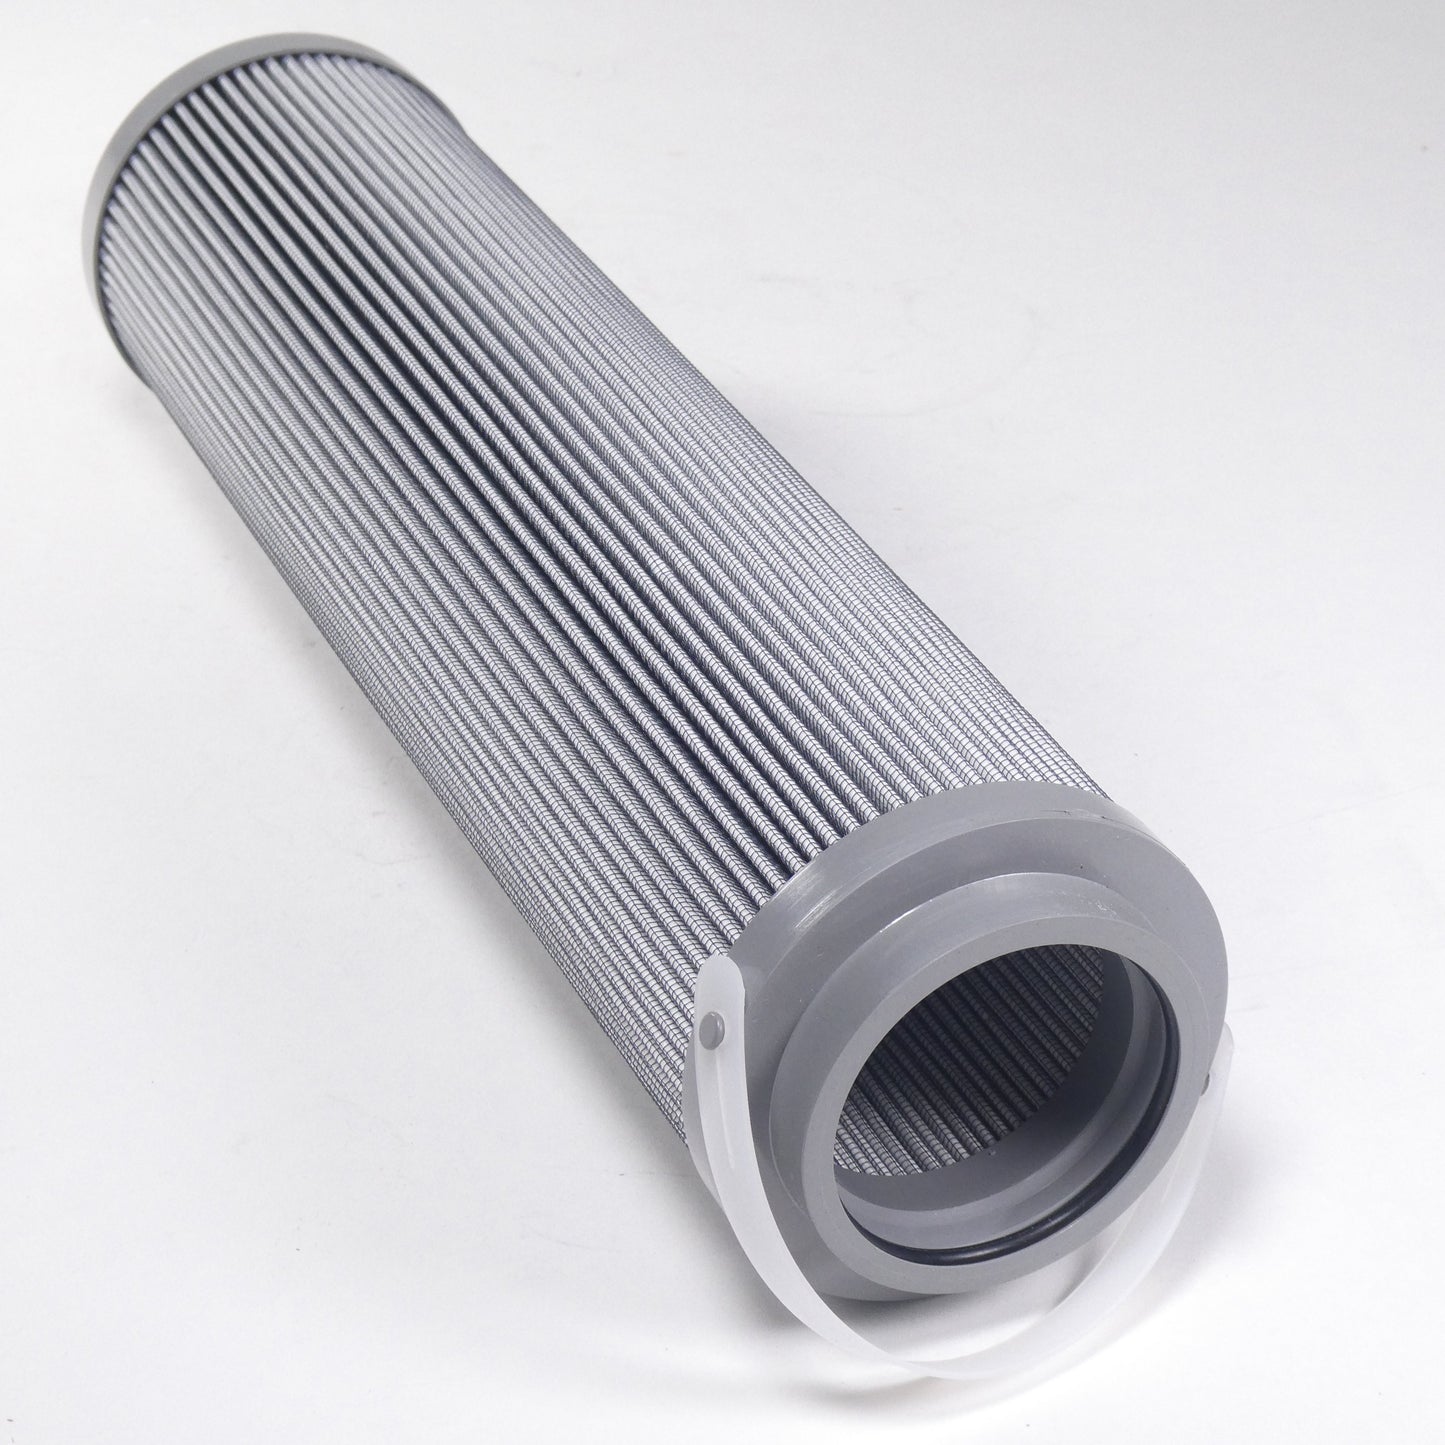 Hydrafil Replacement Filter Element for Kaydon KMP9404A06V08